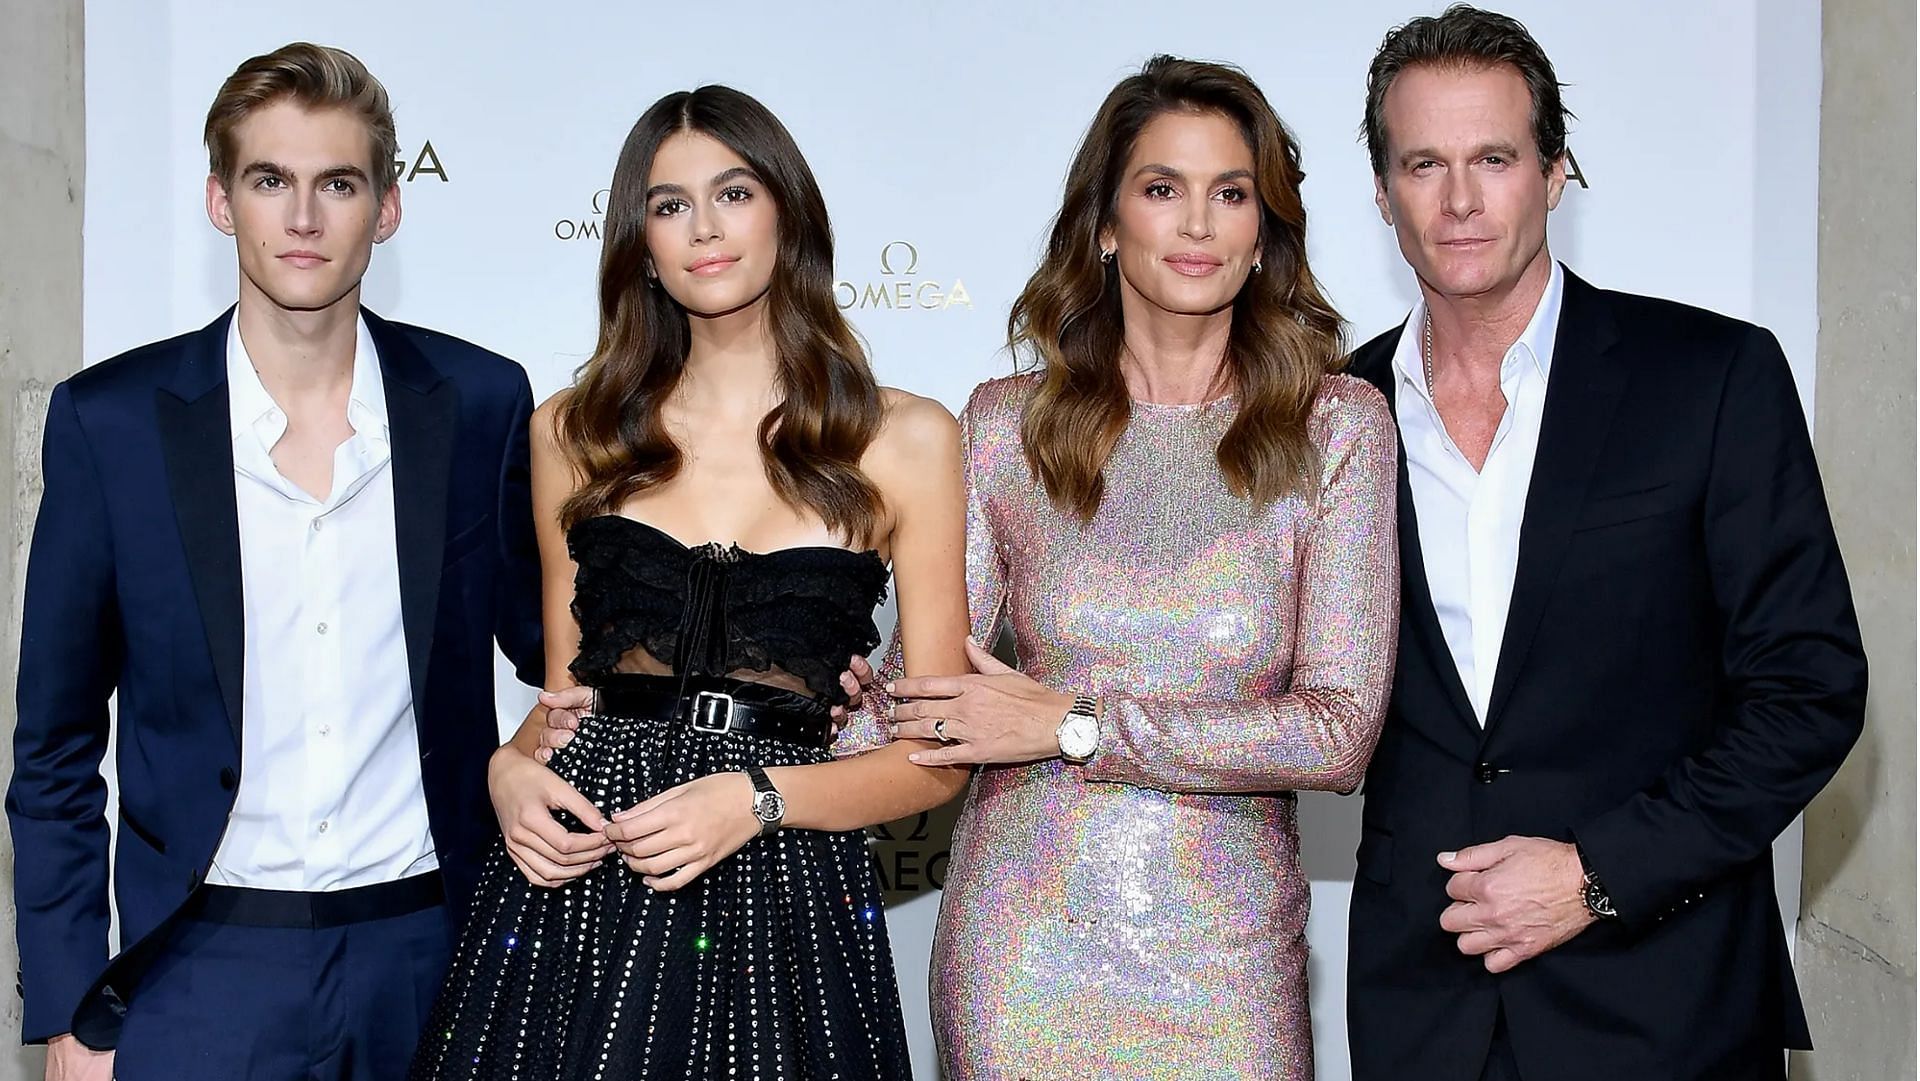 Kaia Gerber is the daughter of Cindy Crawford and Rande Gerber. (Photo via Getty Images)